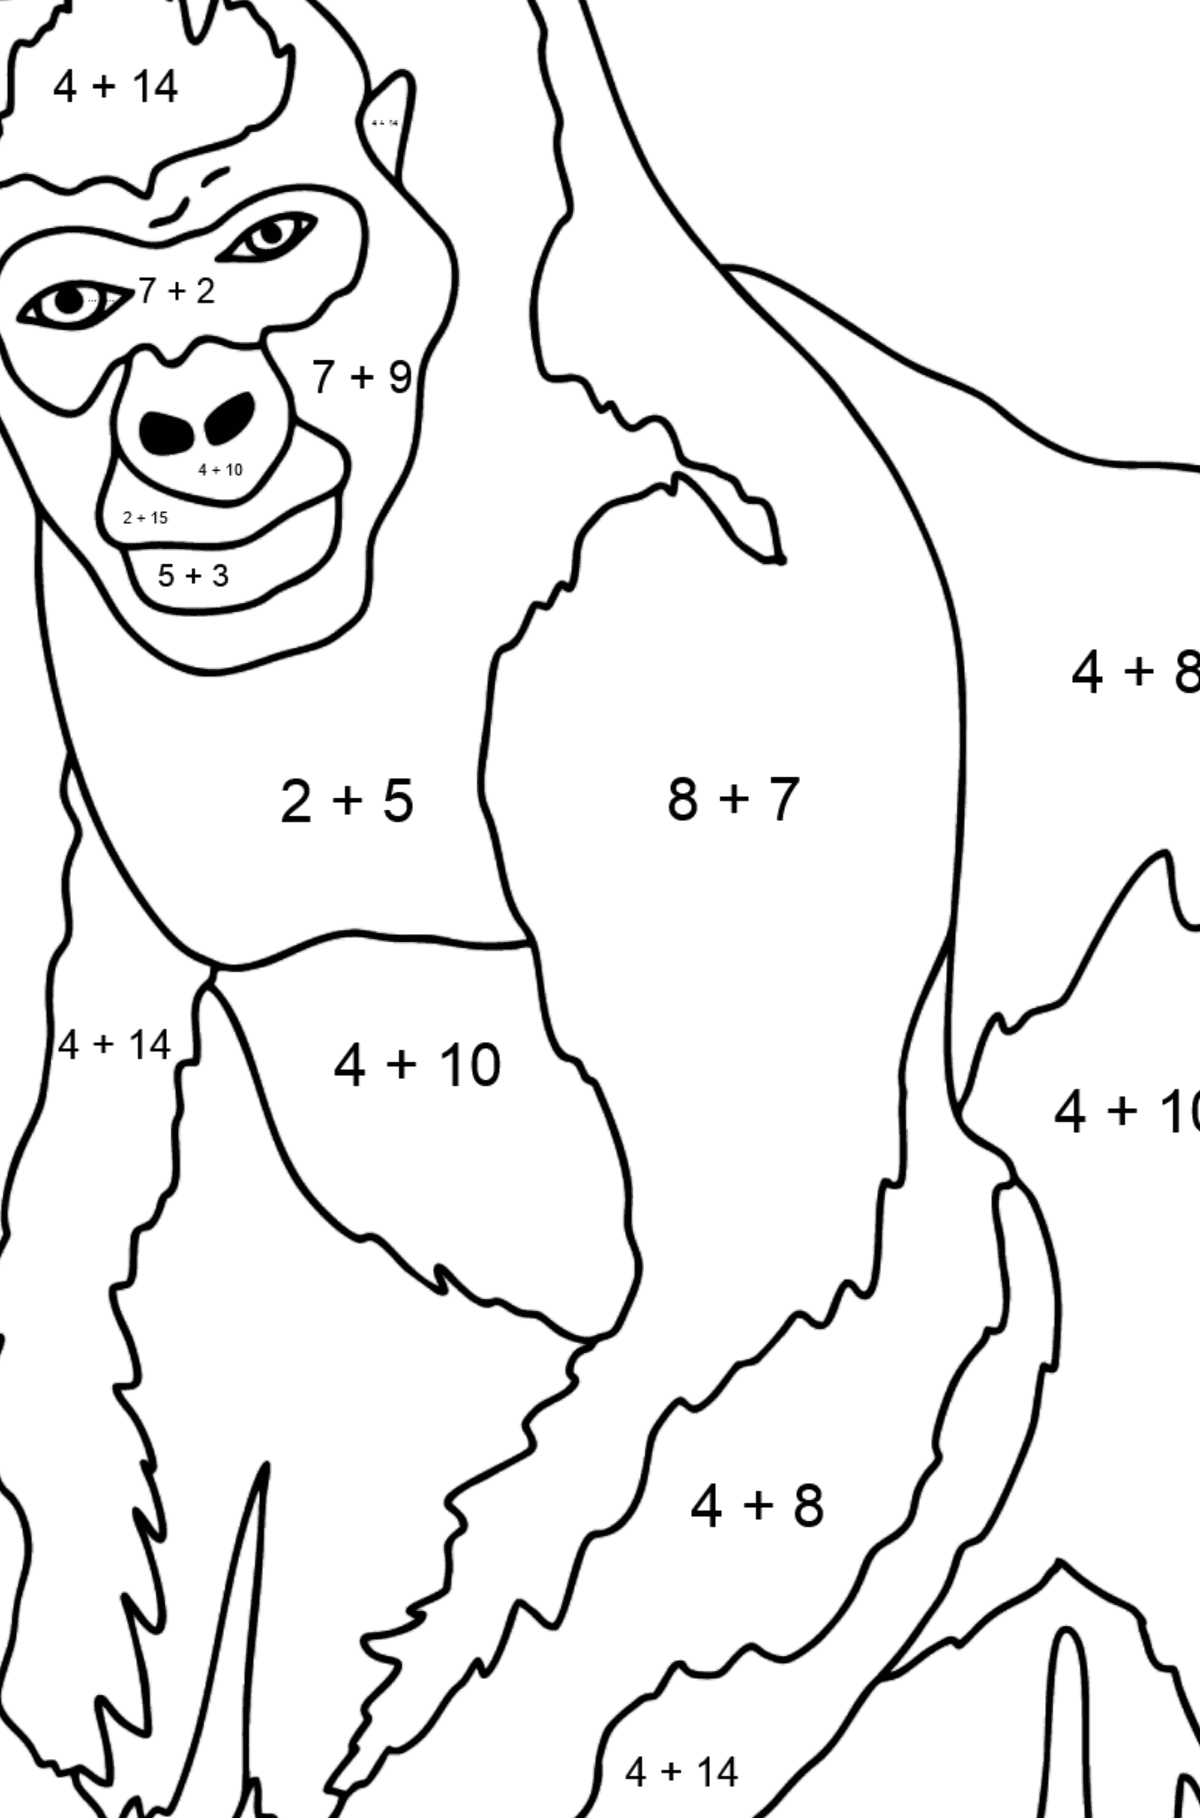 Coloring Page - A Hairy Gorilla - Math Coloring - Addition for Kids